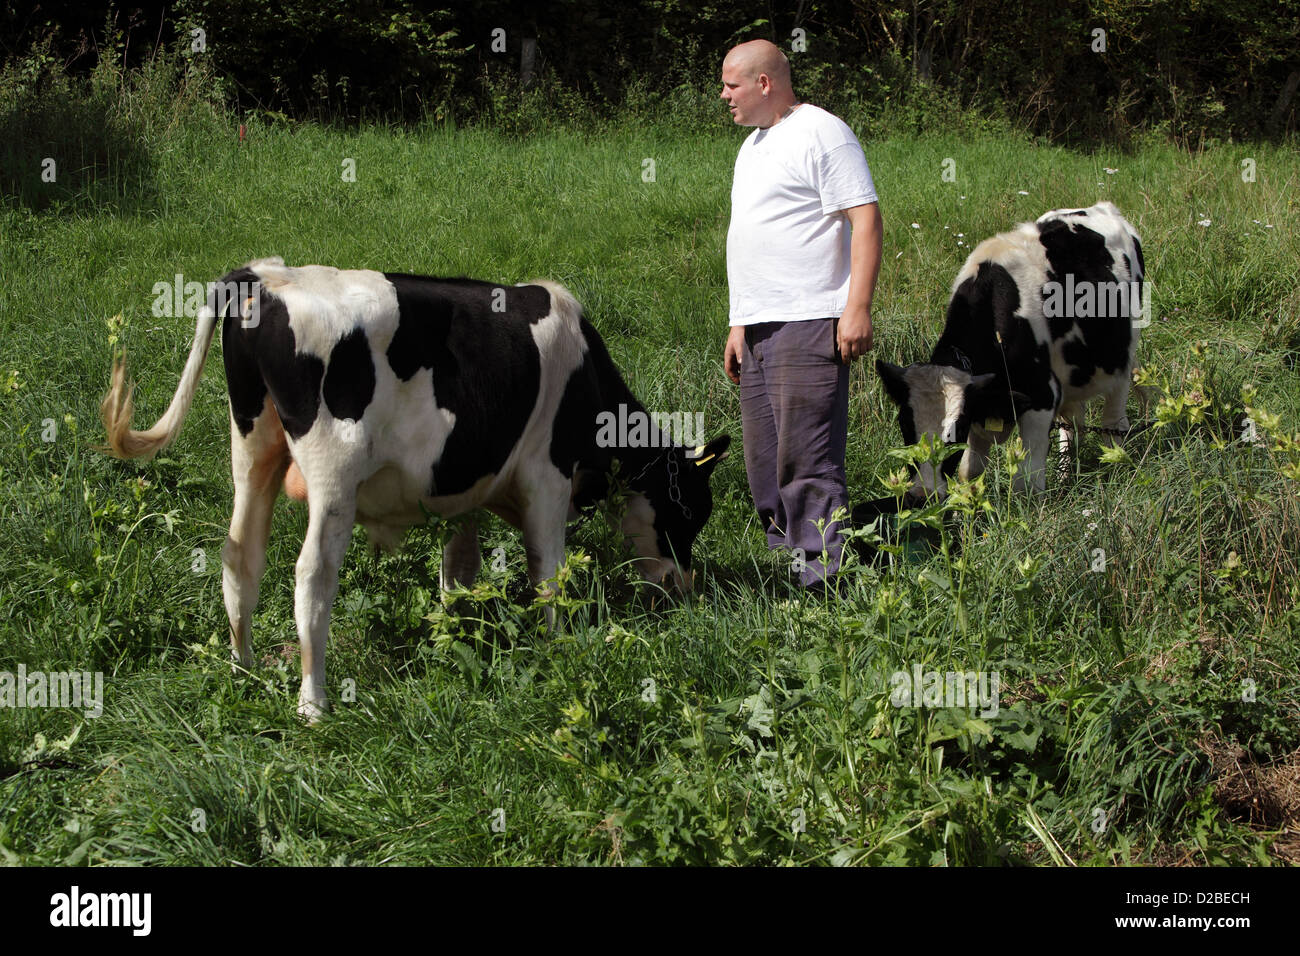 Resplendent village, Germany, farmer and young bulls in a lucrative field Stock Photo